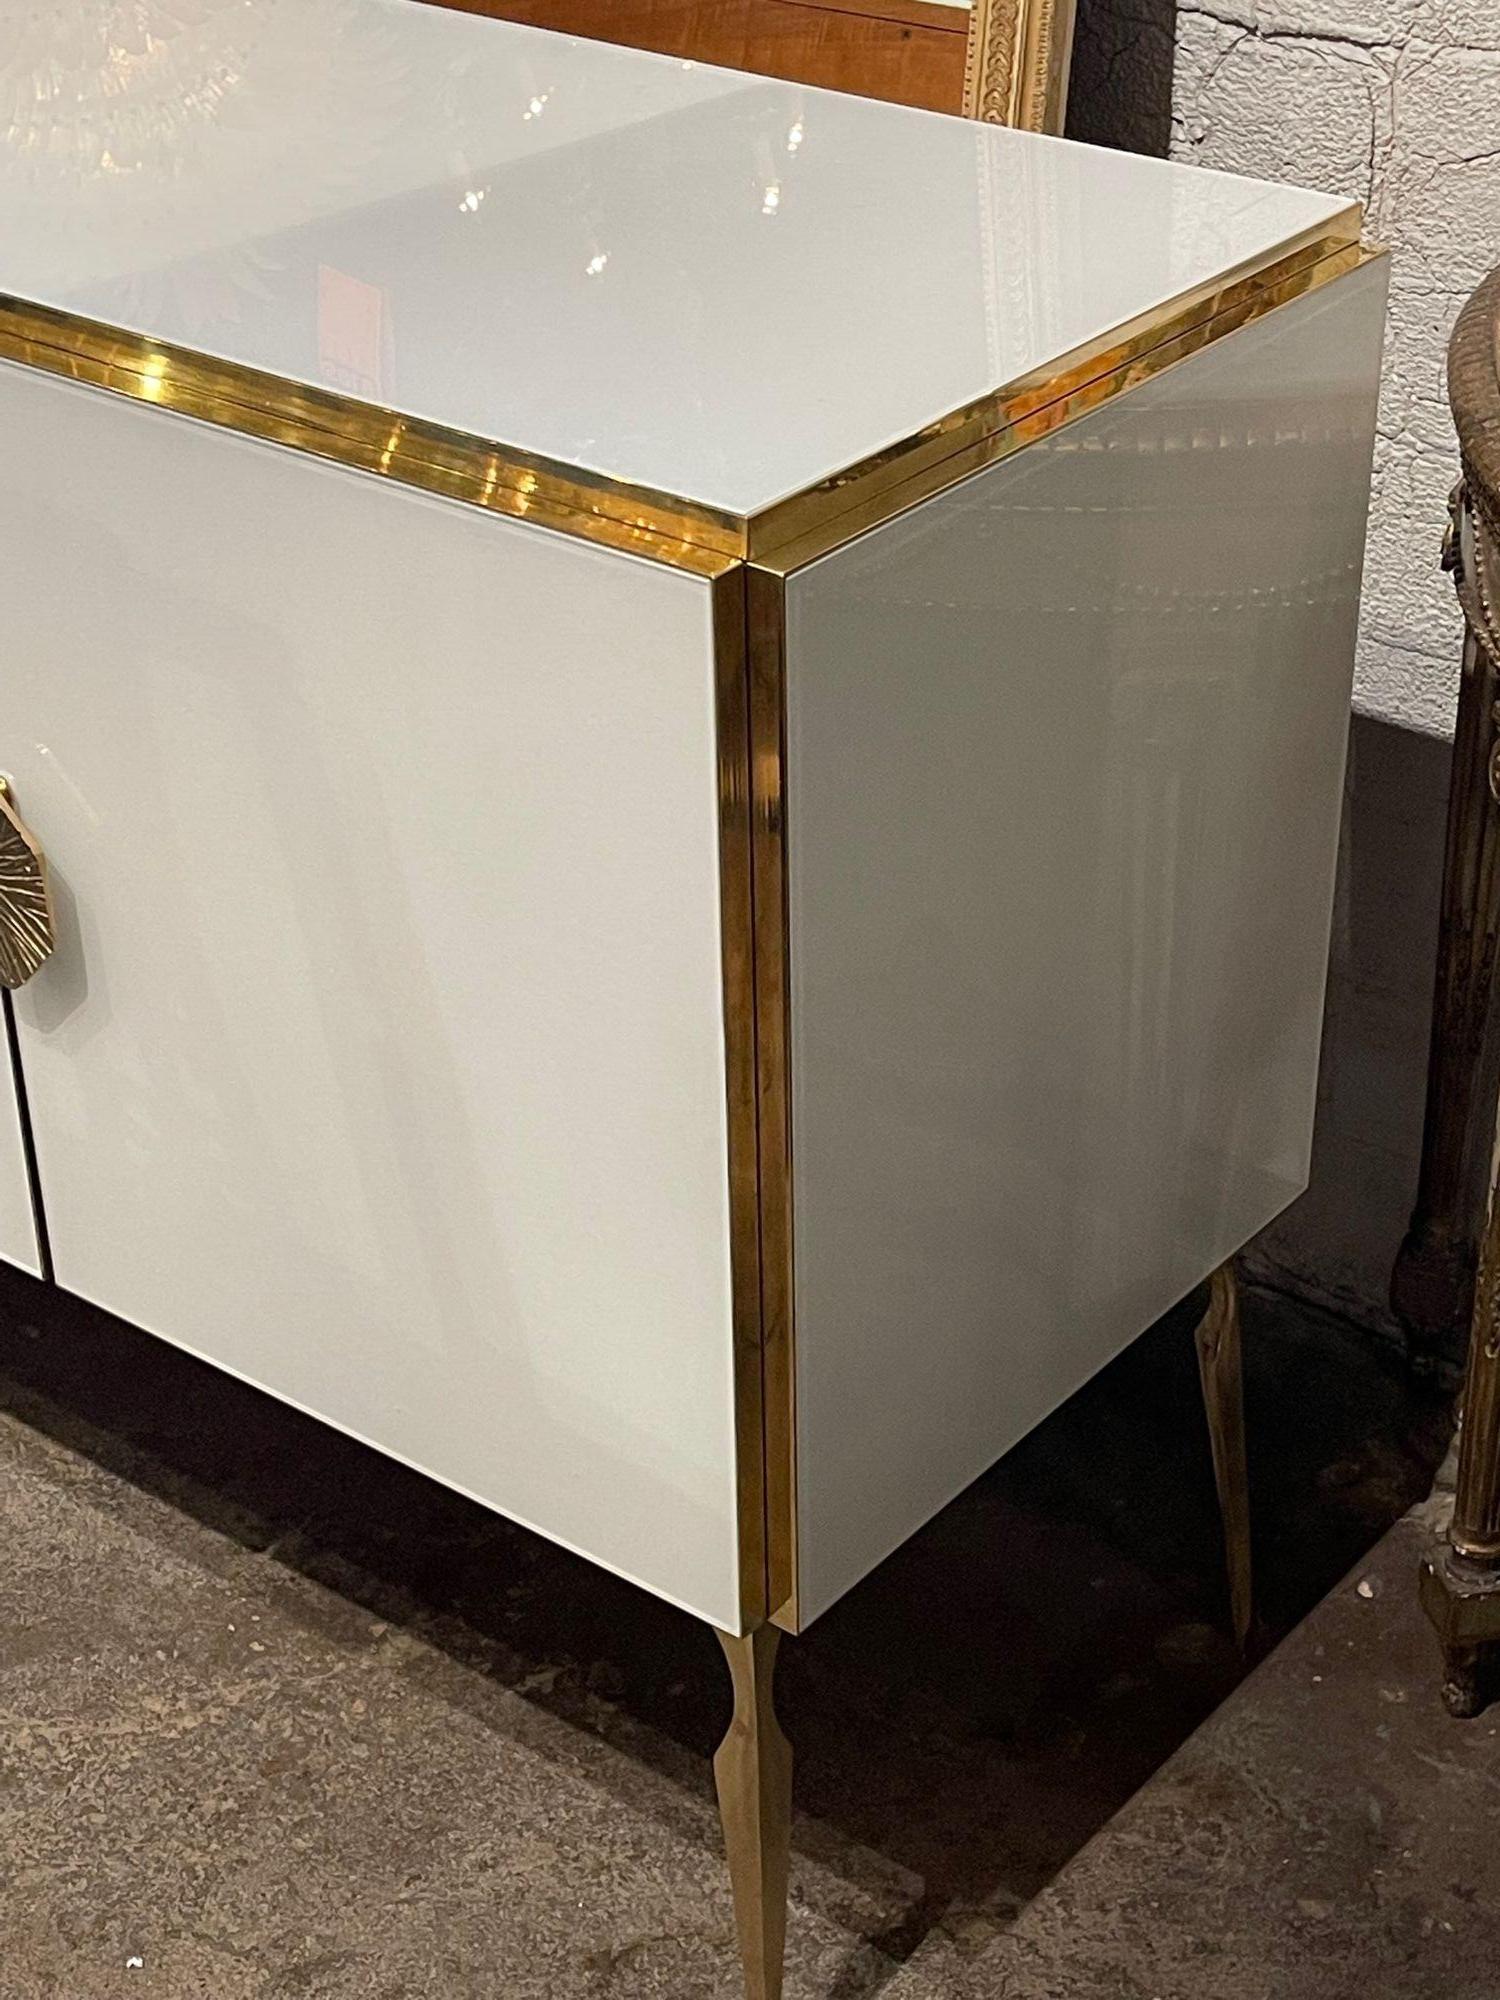 Very fine modern Murano glass sideboard. This piece has beautiful glistening white glass along with polished brass. Creates a very sleek look! Stunning!